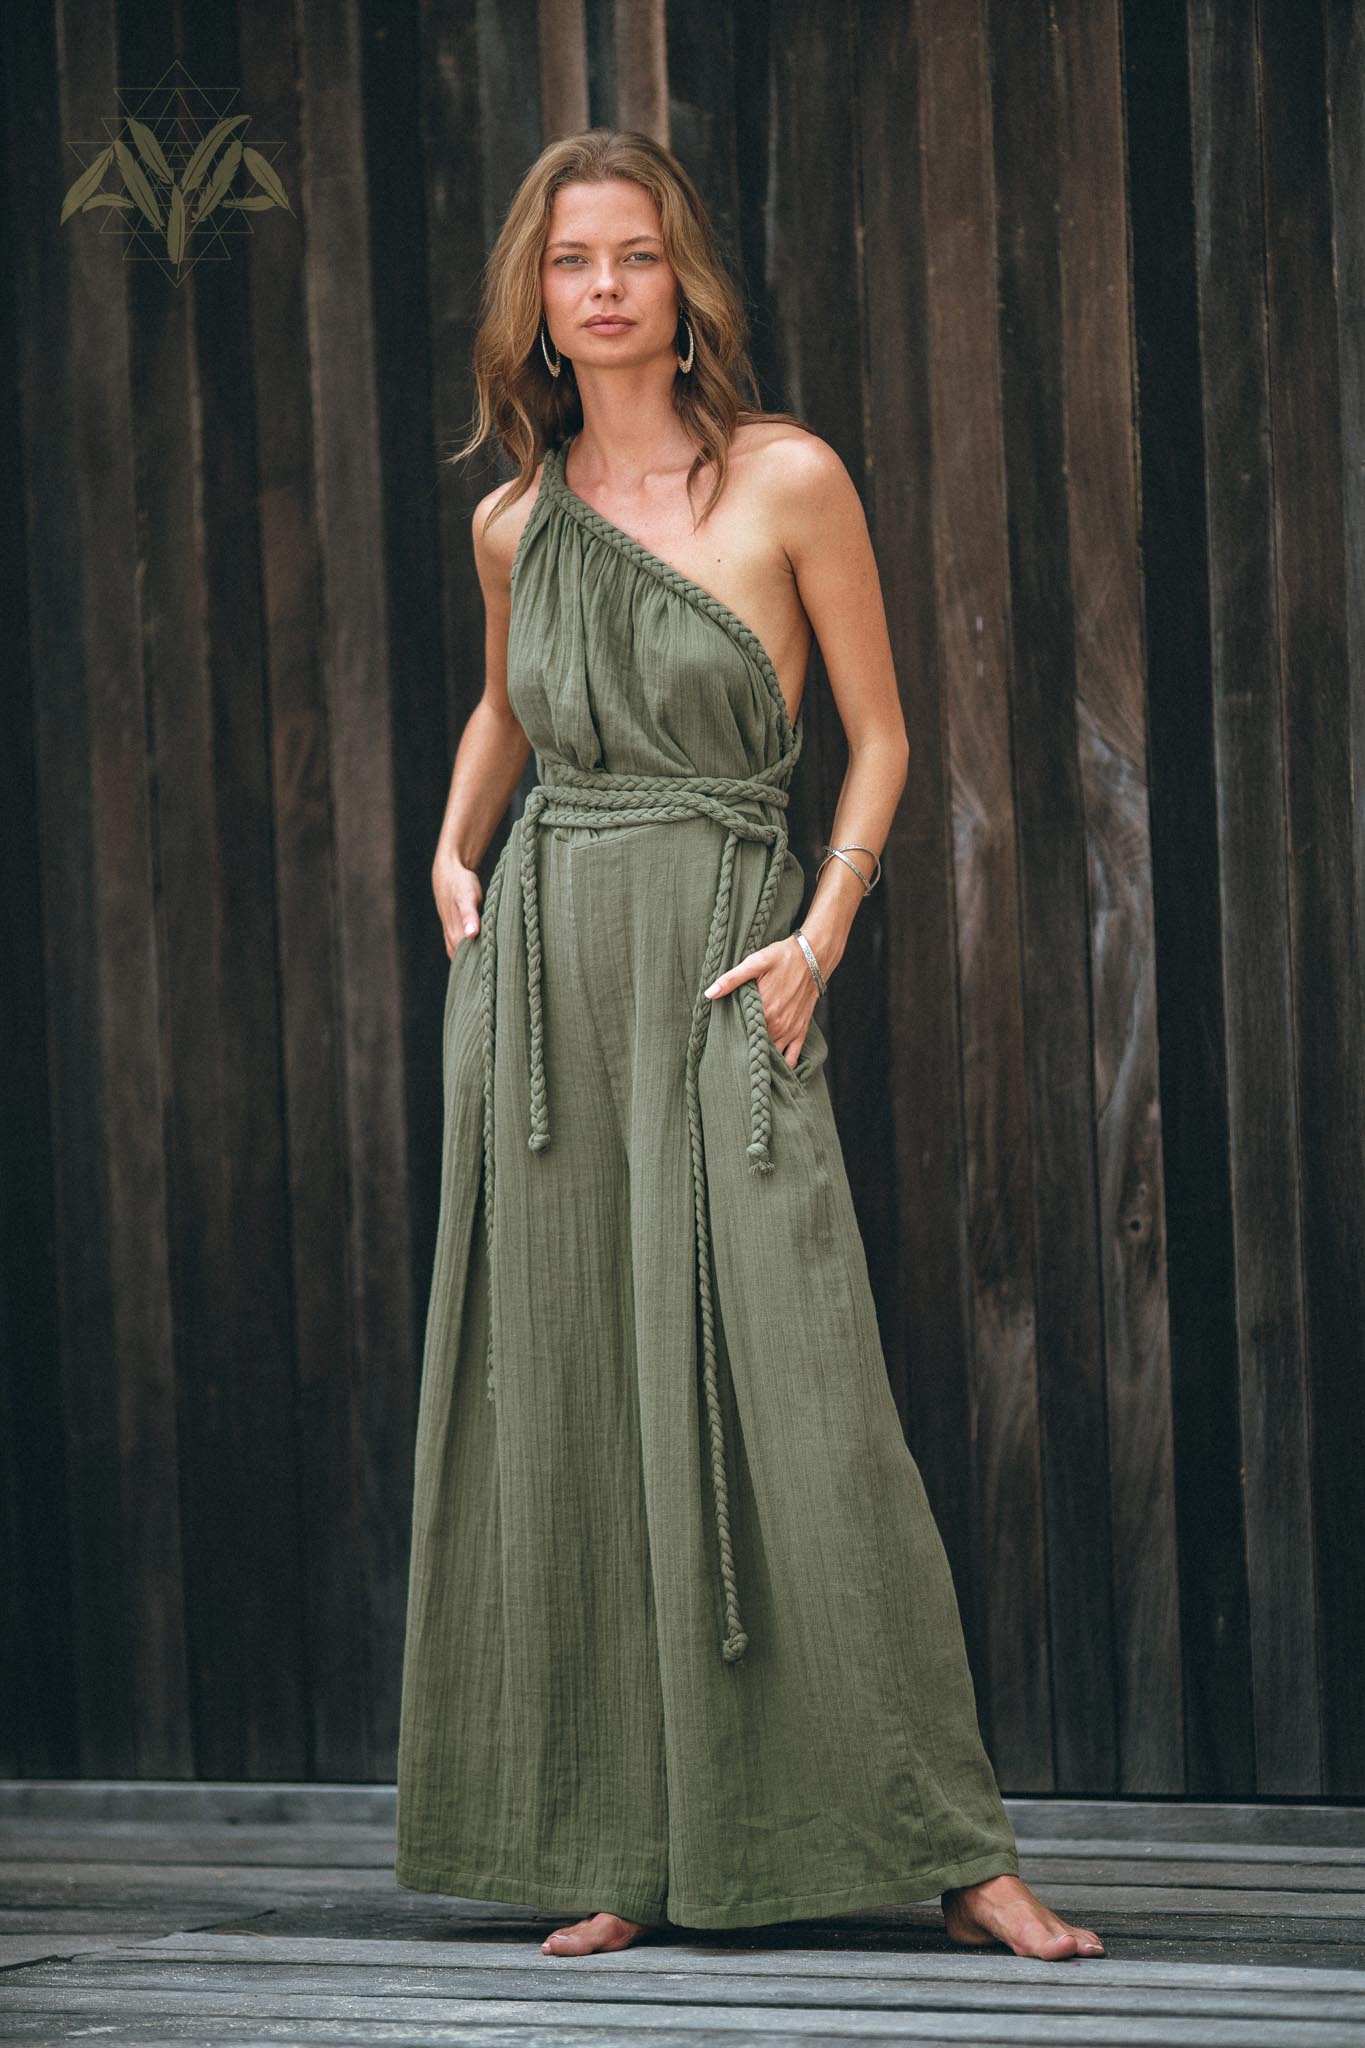 Green Braided Belted Jumpsuit, Overalls for Women, Apron Dress - AYA Sacred Wear